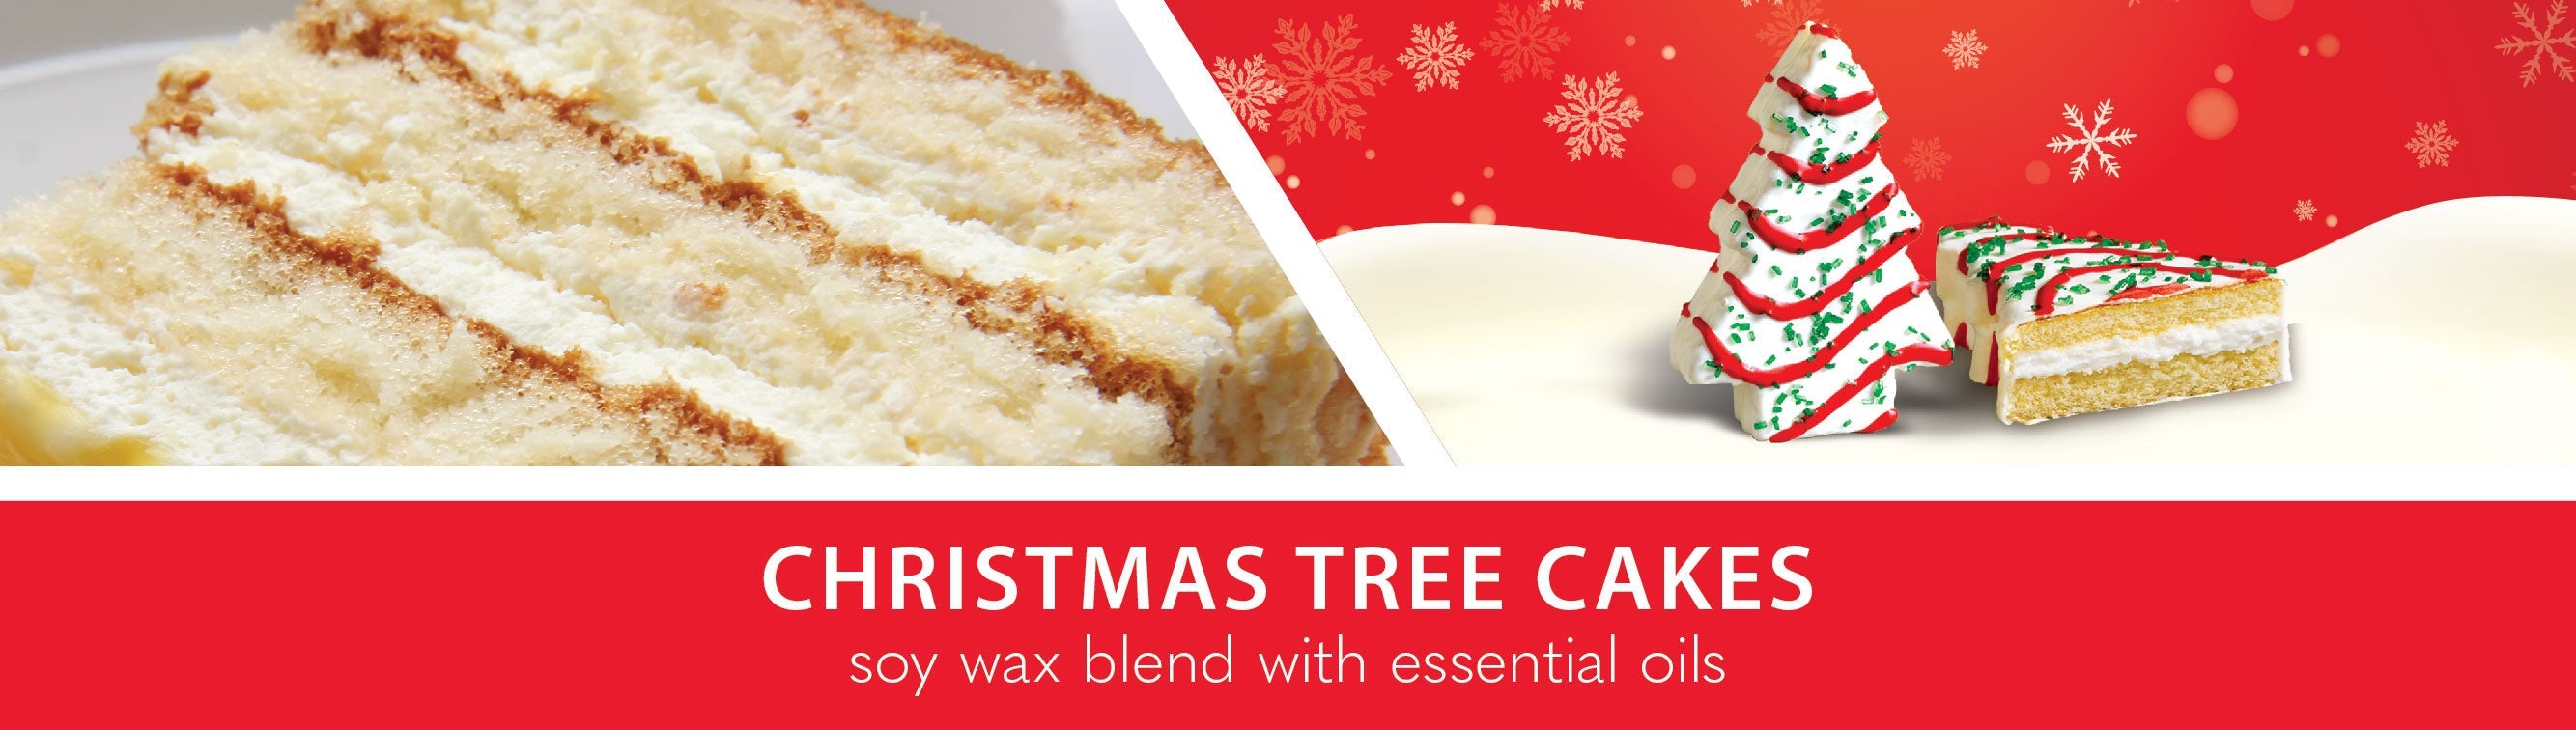 Christmas Tree Cakes Fragrance-Goose Creek Candle